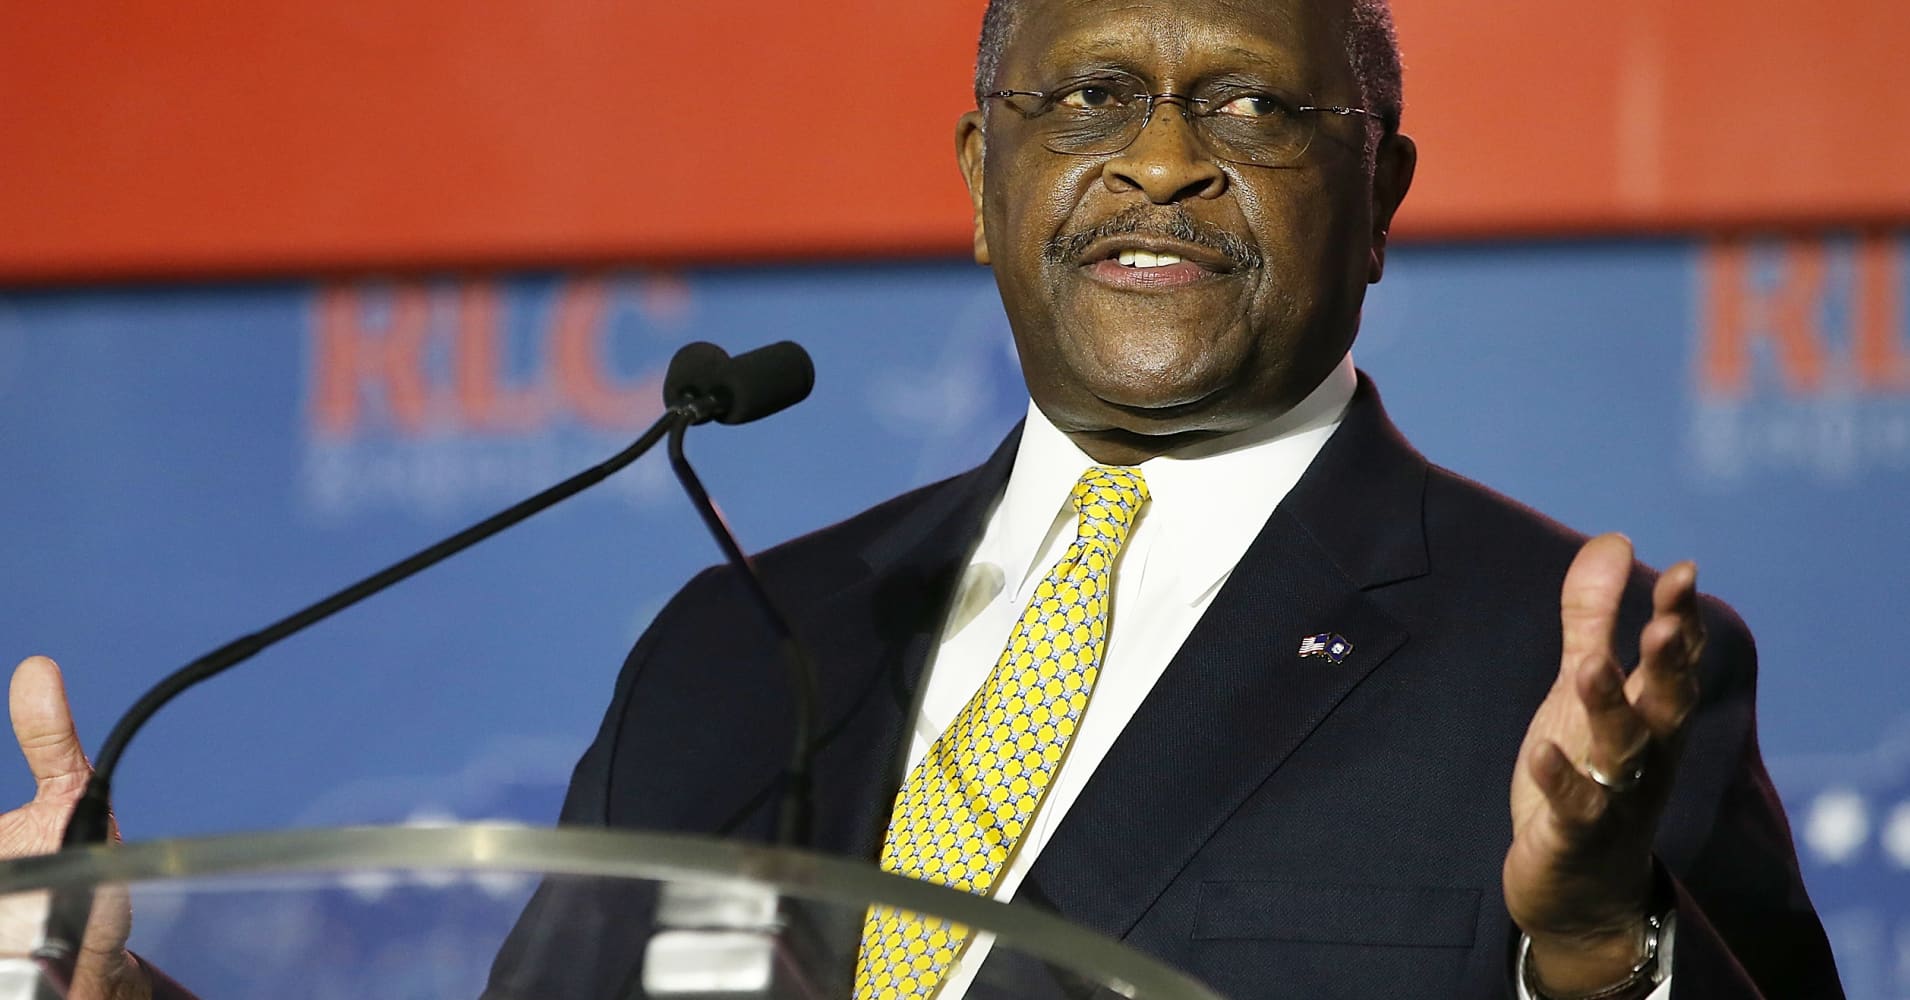 Herman Cain on possible Fed nomination: 'The people who hate me are digging up negative stuff'